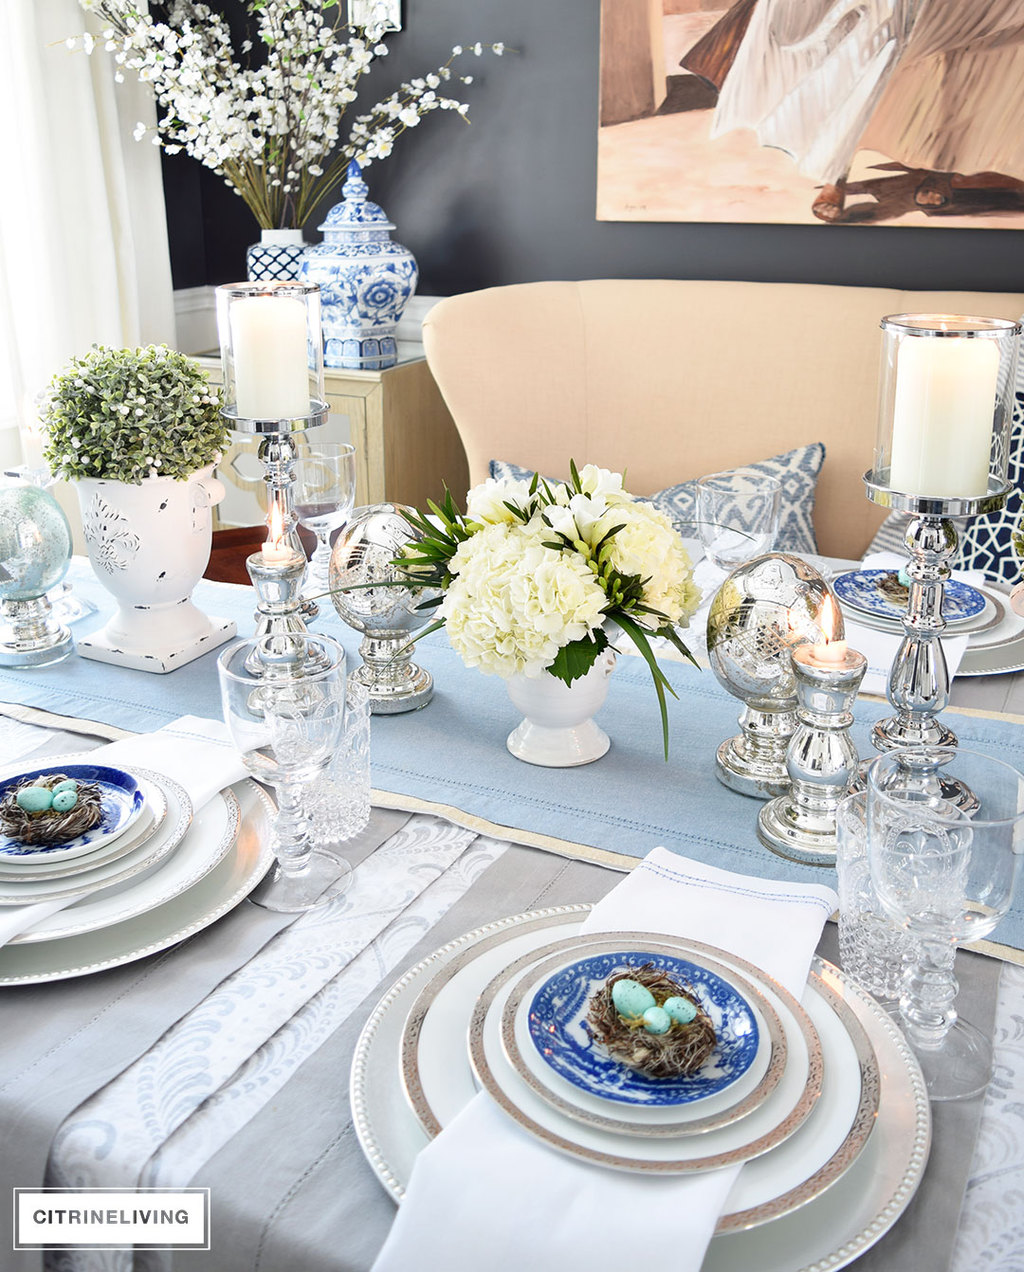 A gorgeous Easter tablescape with mercury glass accents and a mix of silver and white with blue and white china. Fresh and beautiful white hydrangeas are the perfect centerpiece.